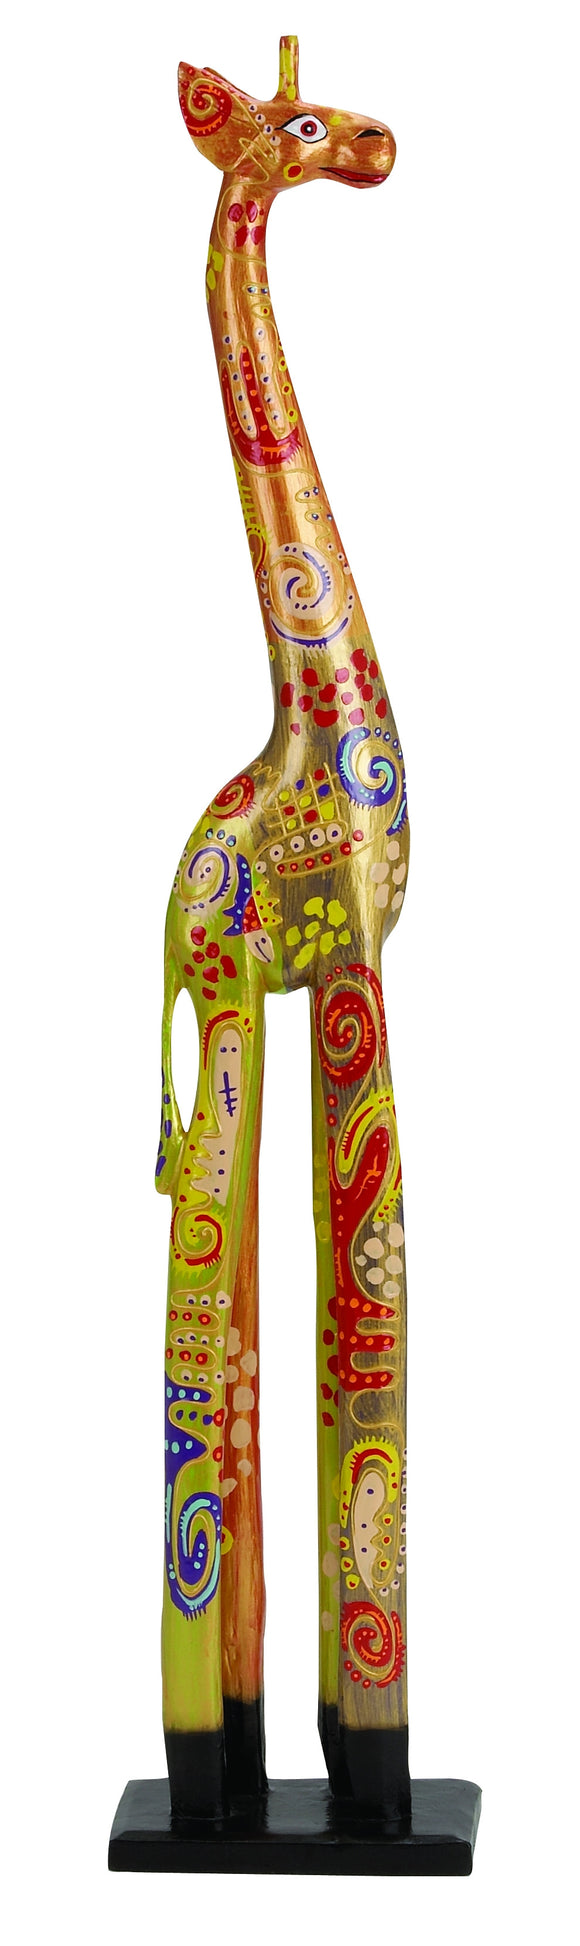 WOOD GIRAFFE 40 INCHES HIGH FOR WILD LIFE LOVERS